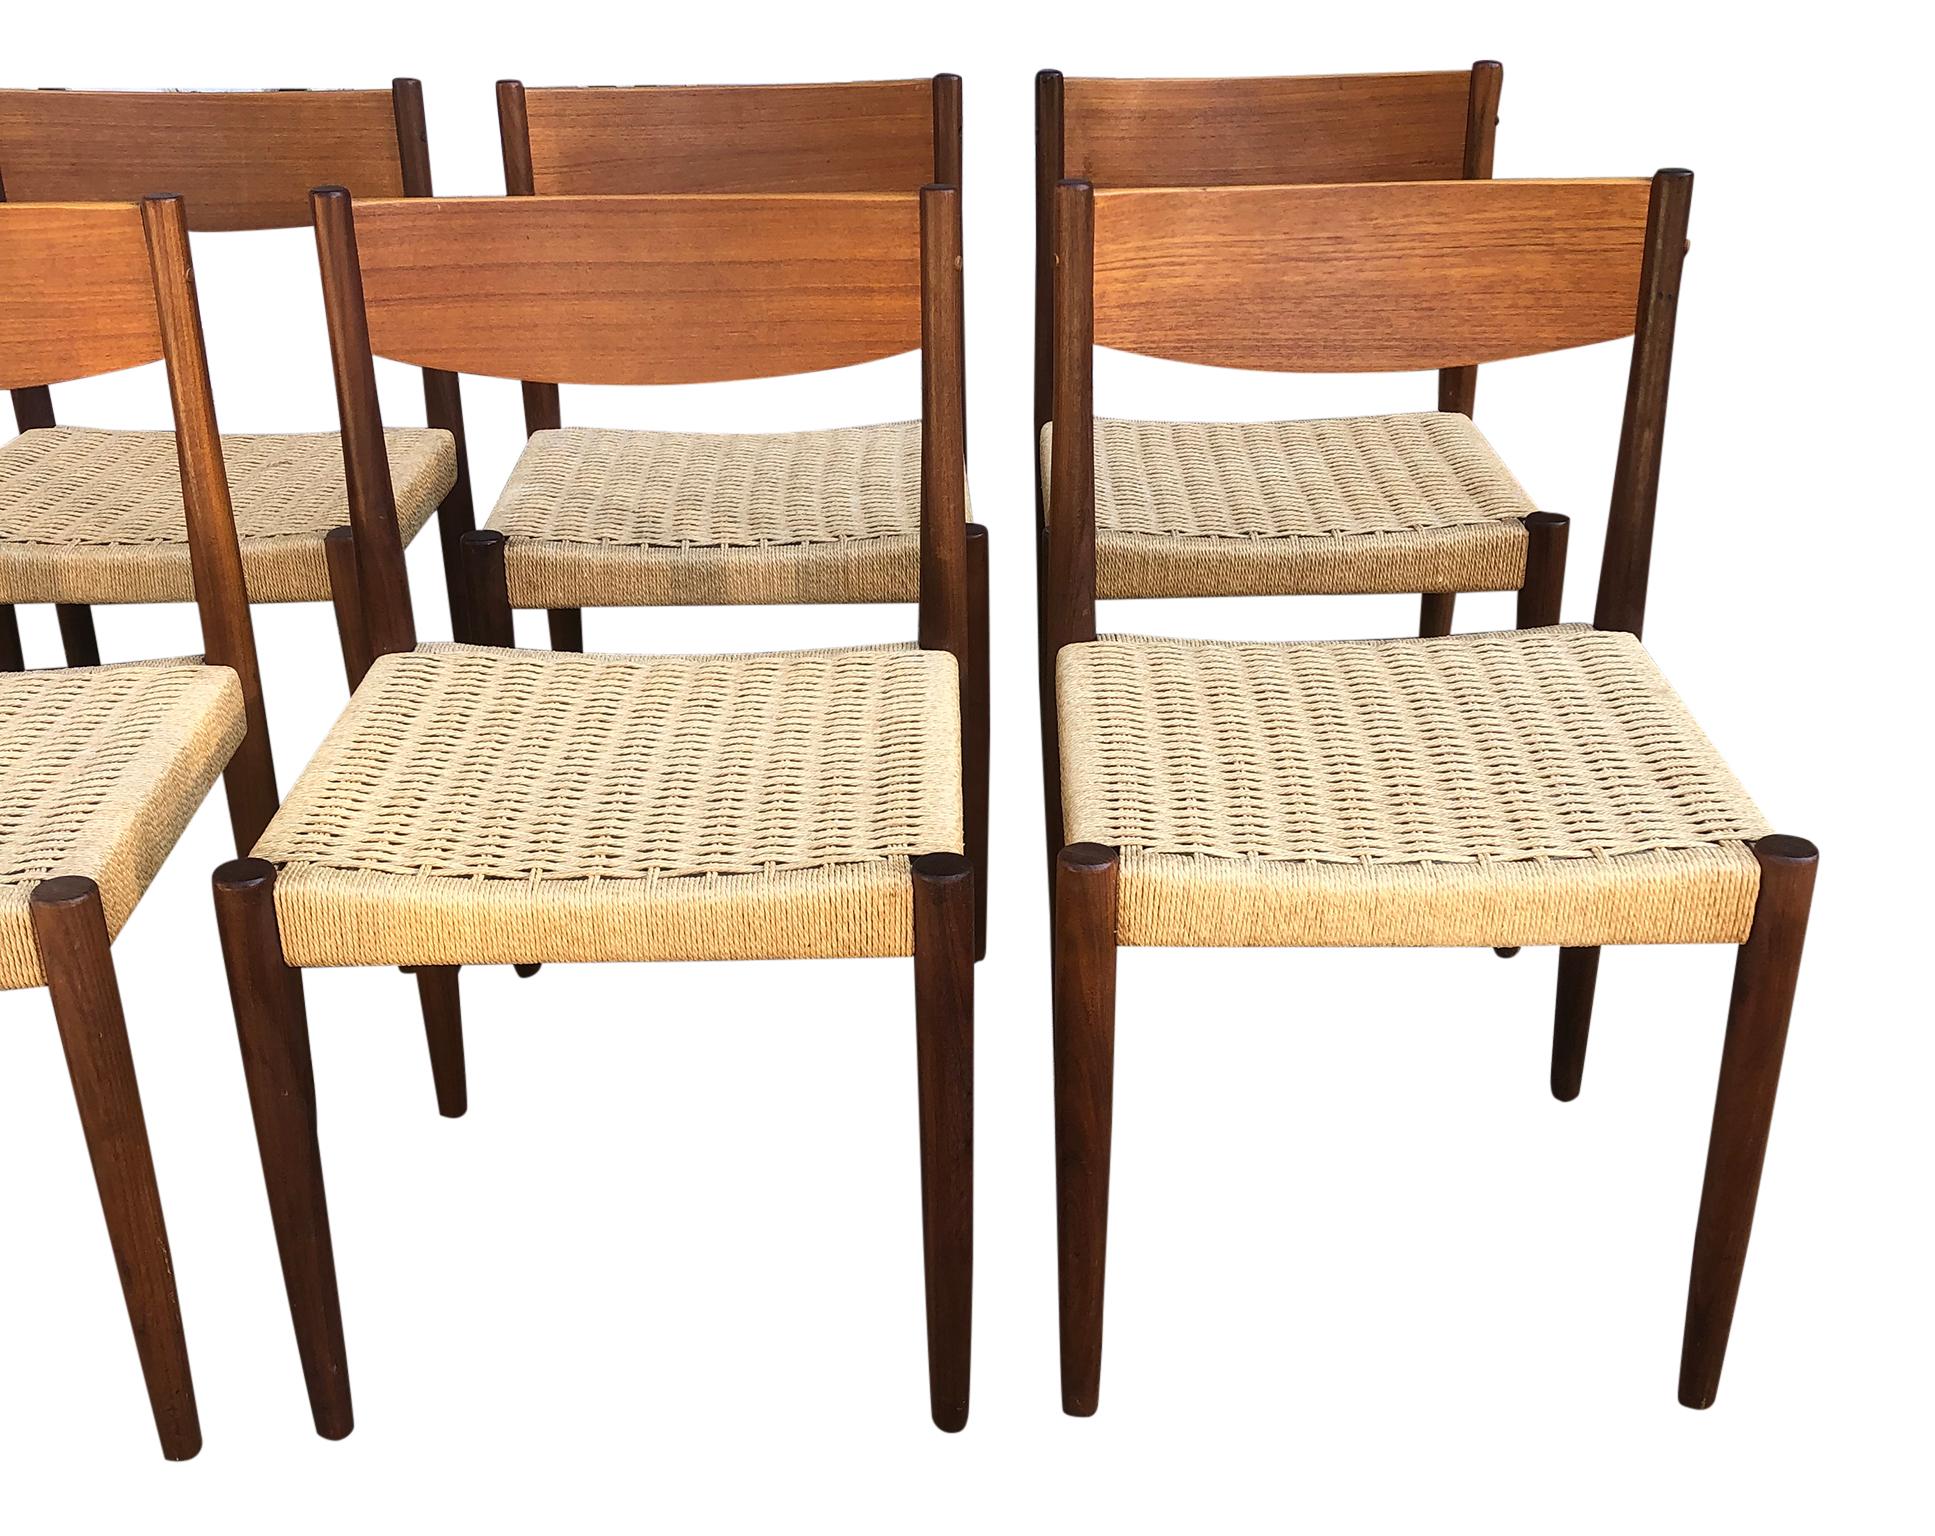 American '8' Midcentury Danish Teak Papercord Dining Chairs by Poul Volther